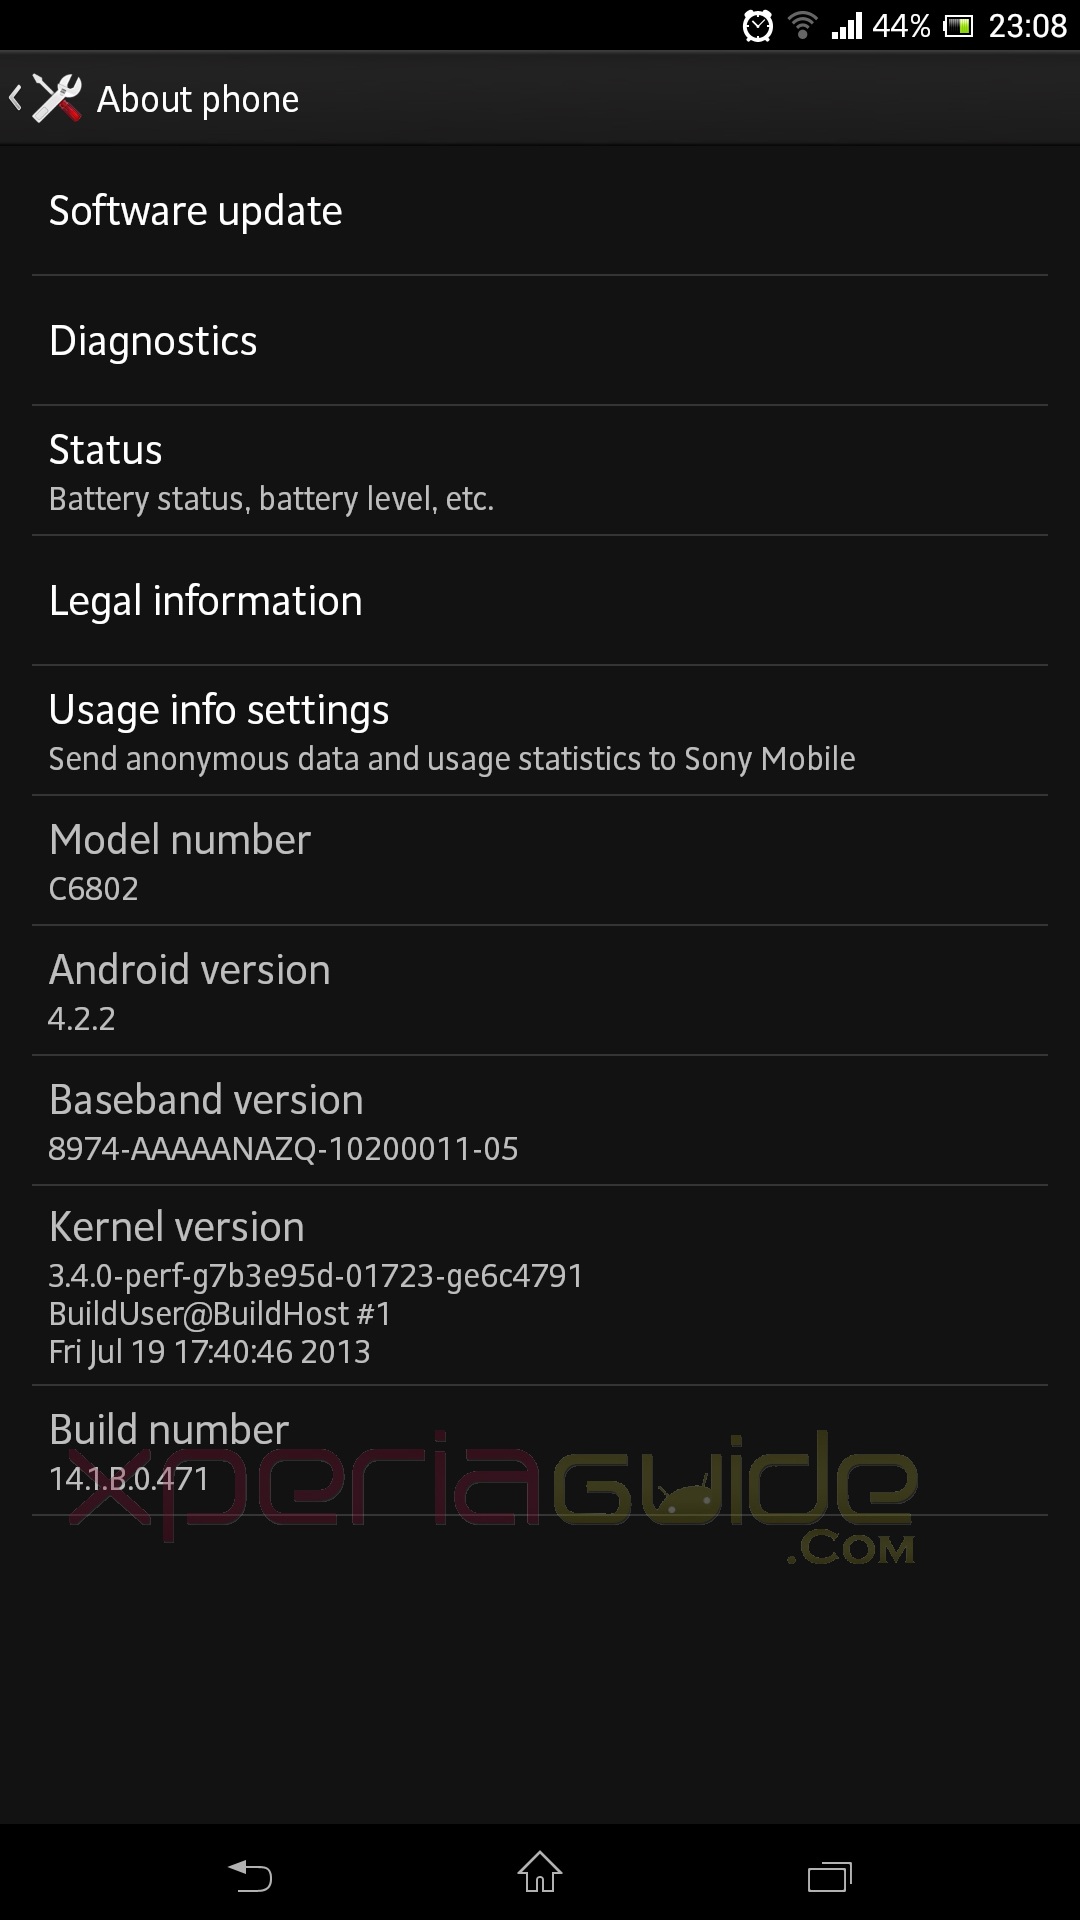 Xperia Z Ultra C6802 Android 4.2.2 14.1.B.0.471 firmware update Details